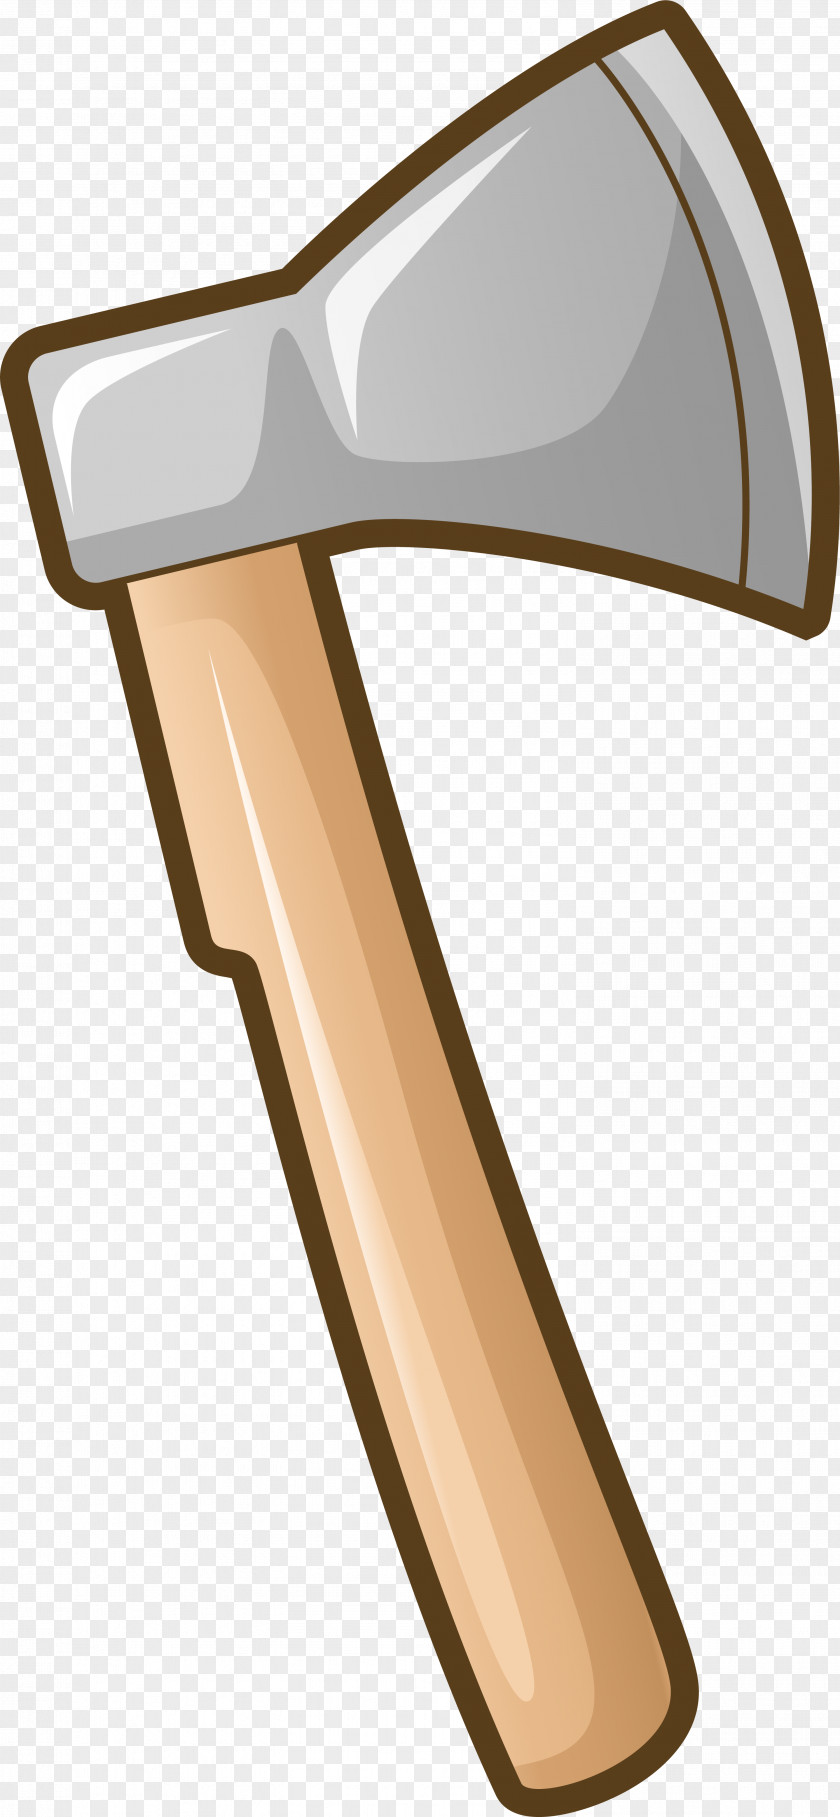 Simple Grey Axe Woodworking Tool PNG